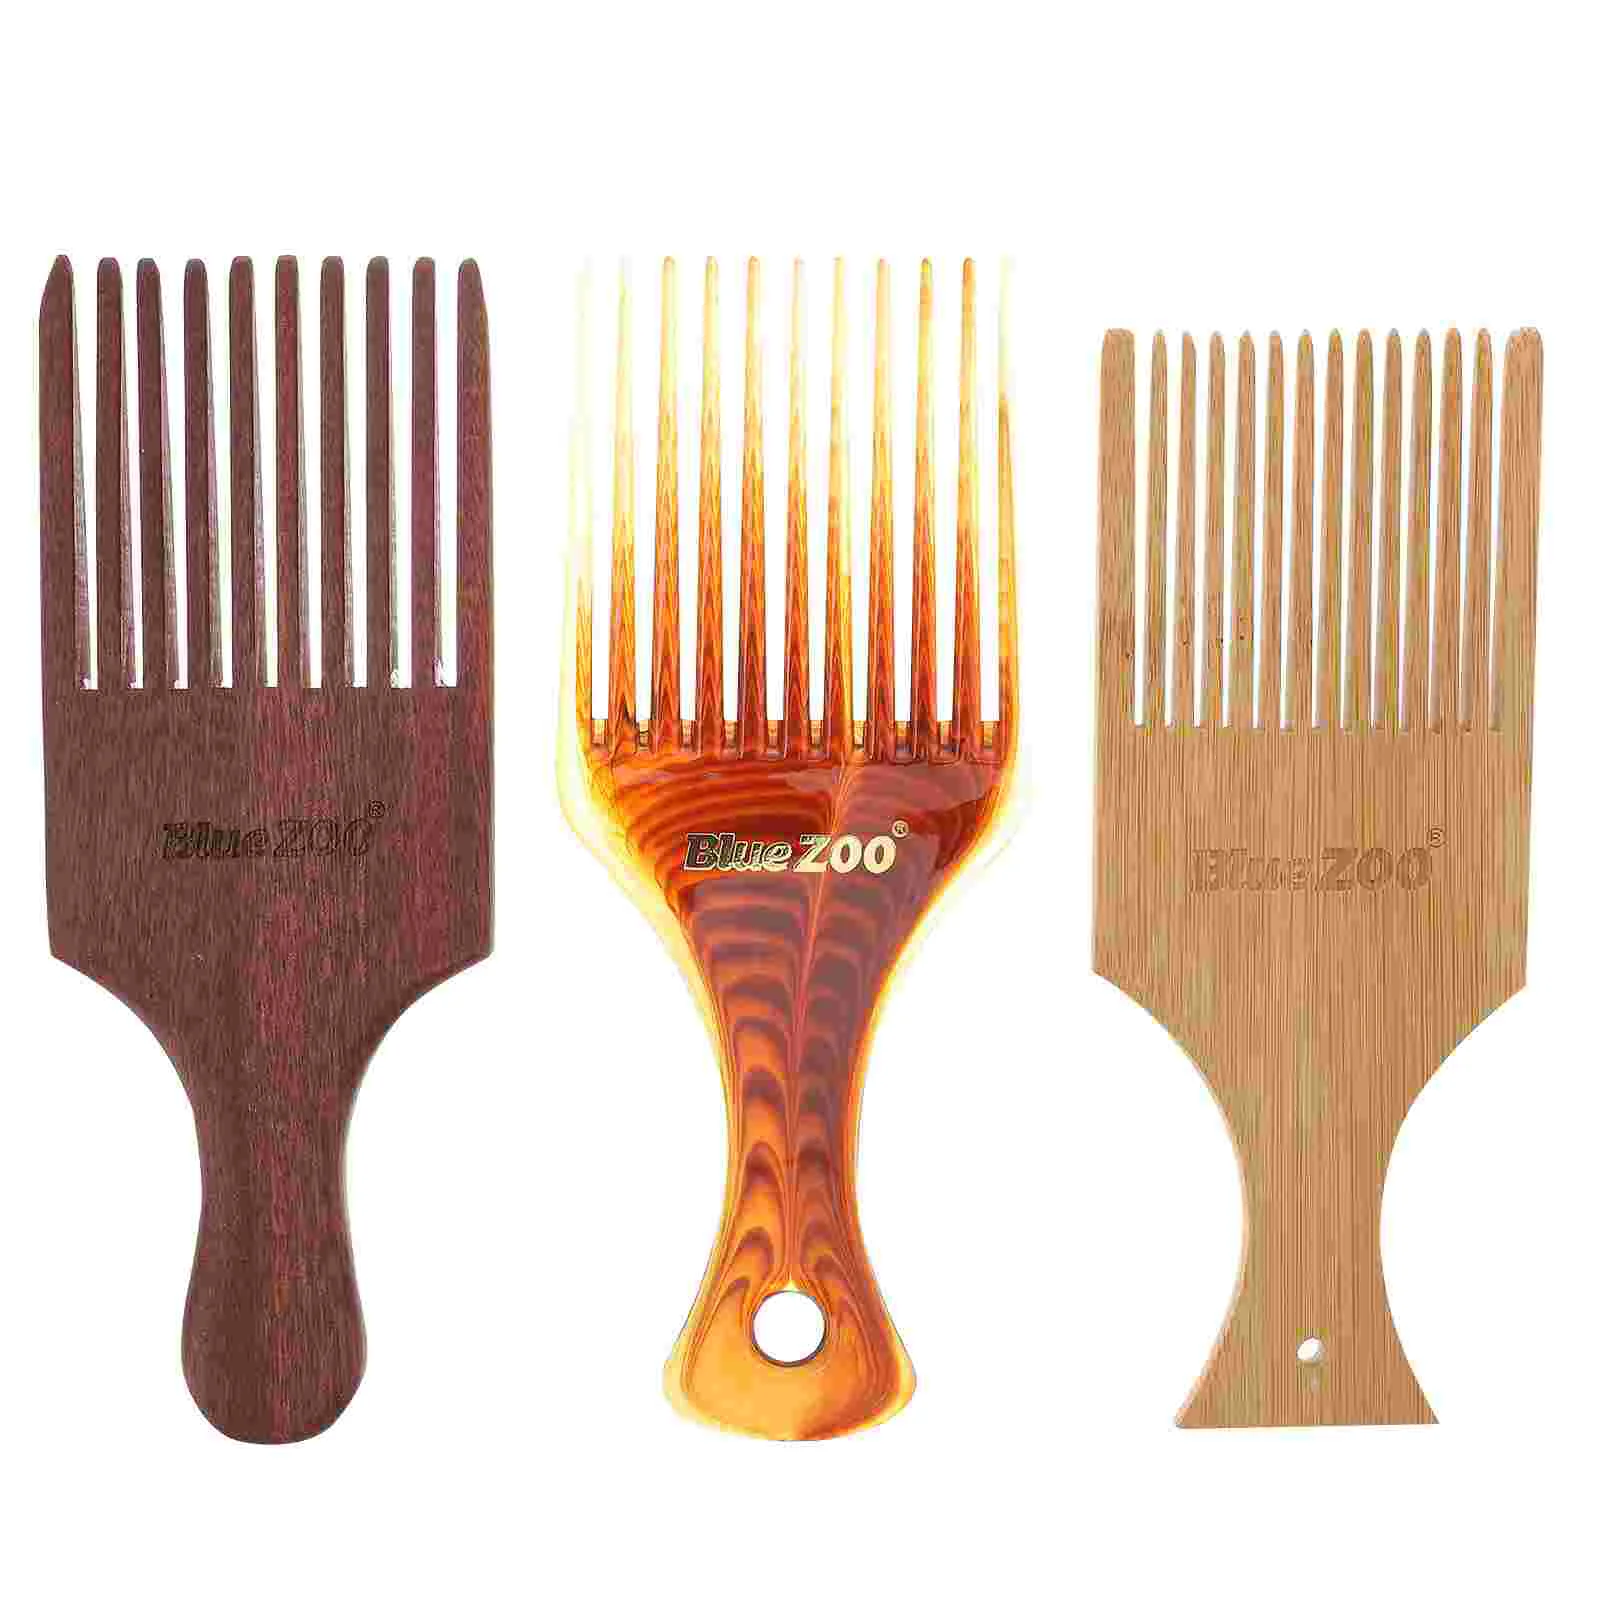 

Hair Comb Pick Afro Men Picks Wide Brush Wooden Tooth Women Set Curly Lift Combs Smooth Styling Hairdressing Natural No